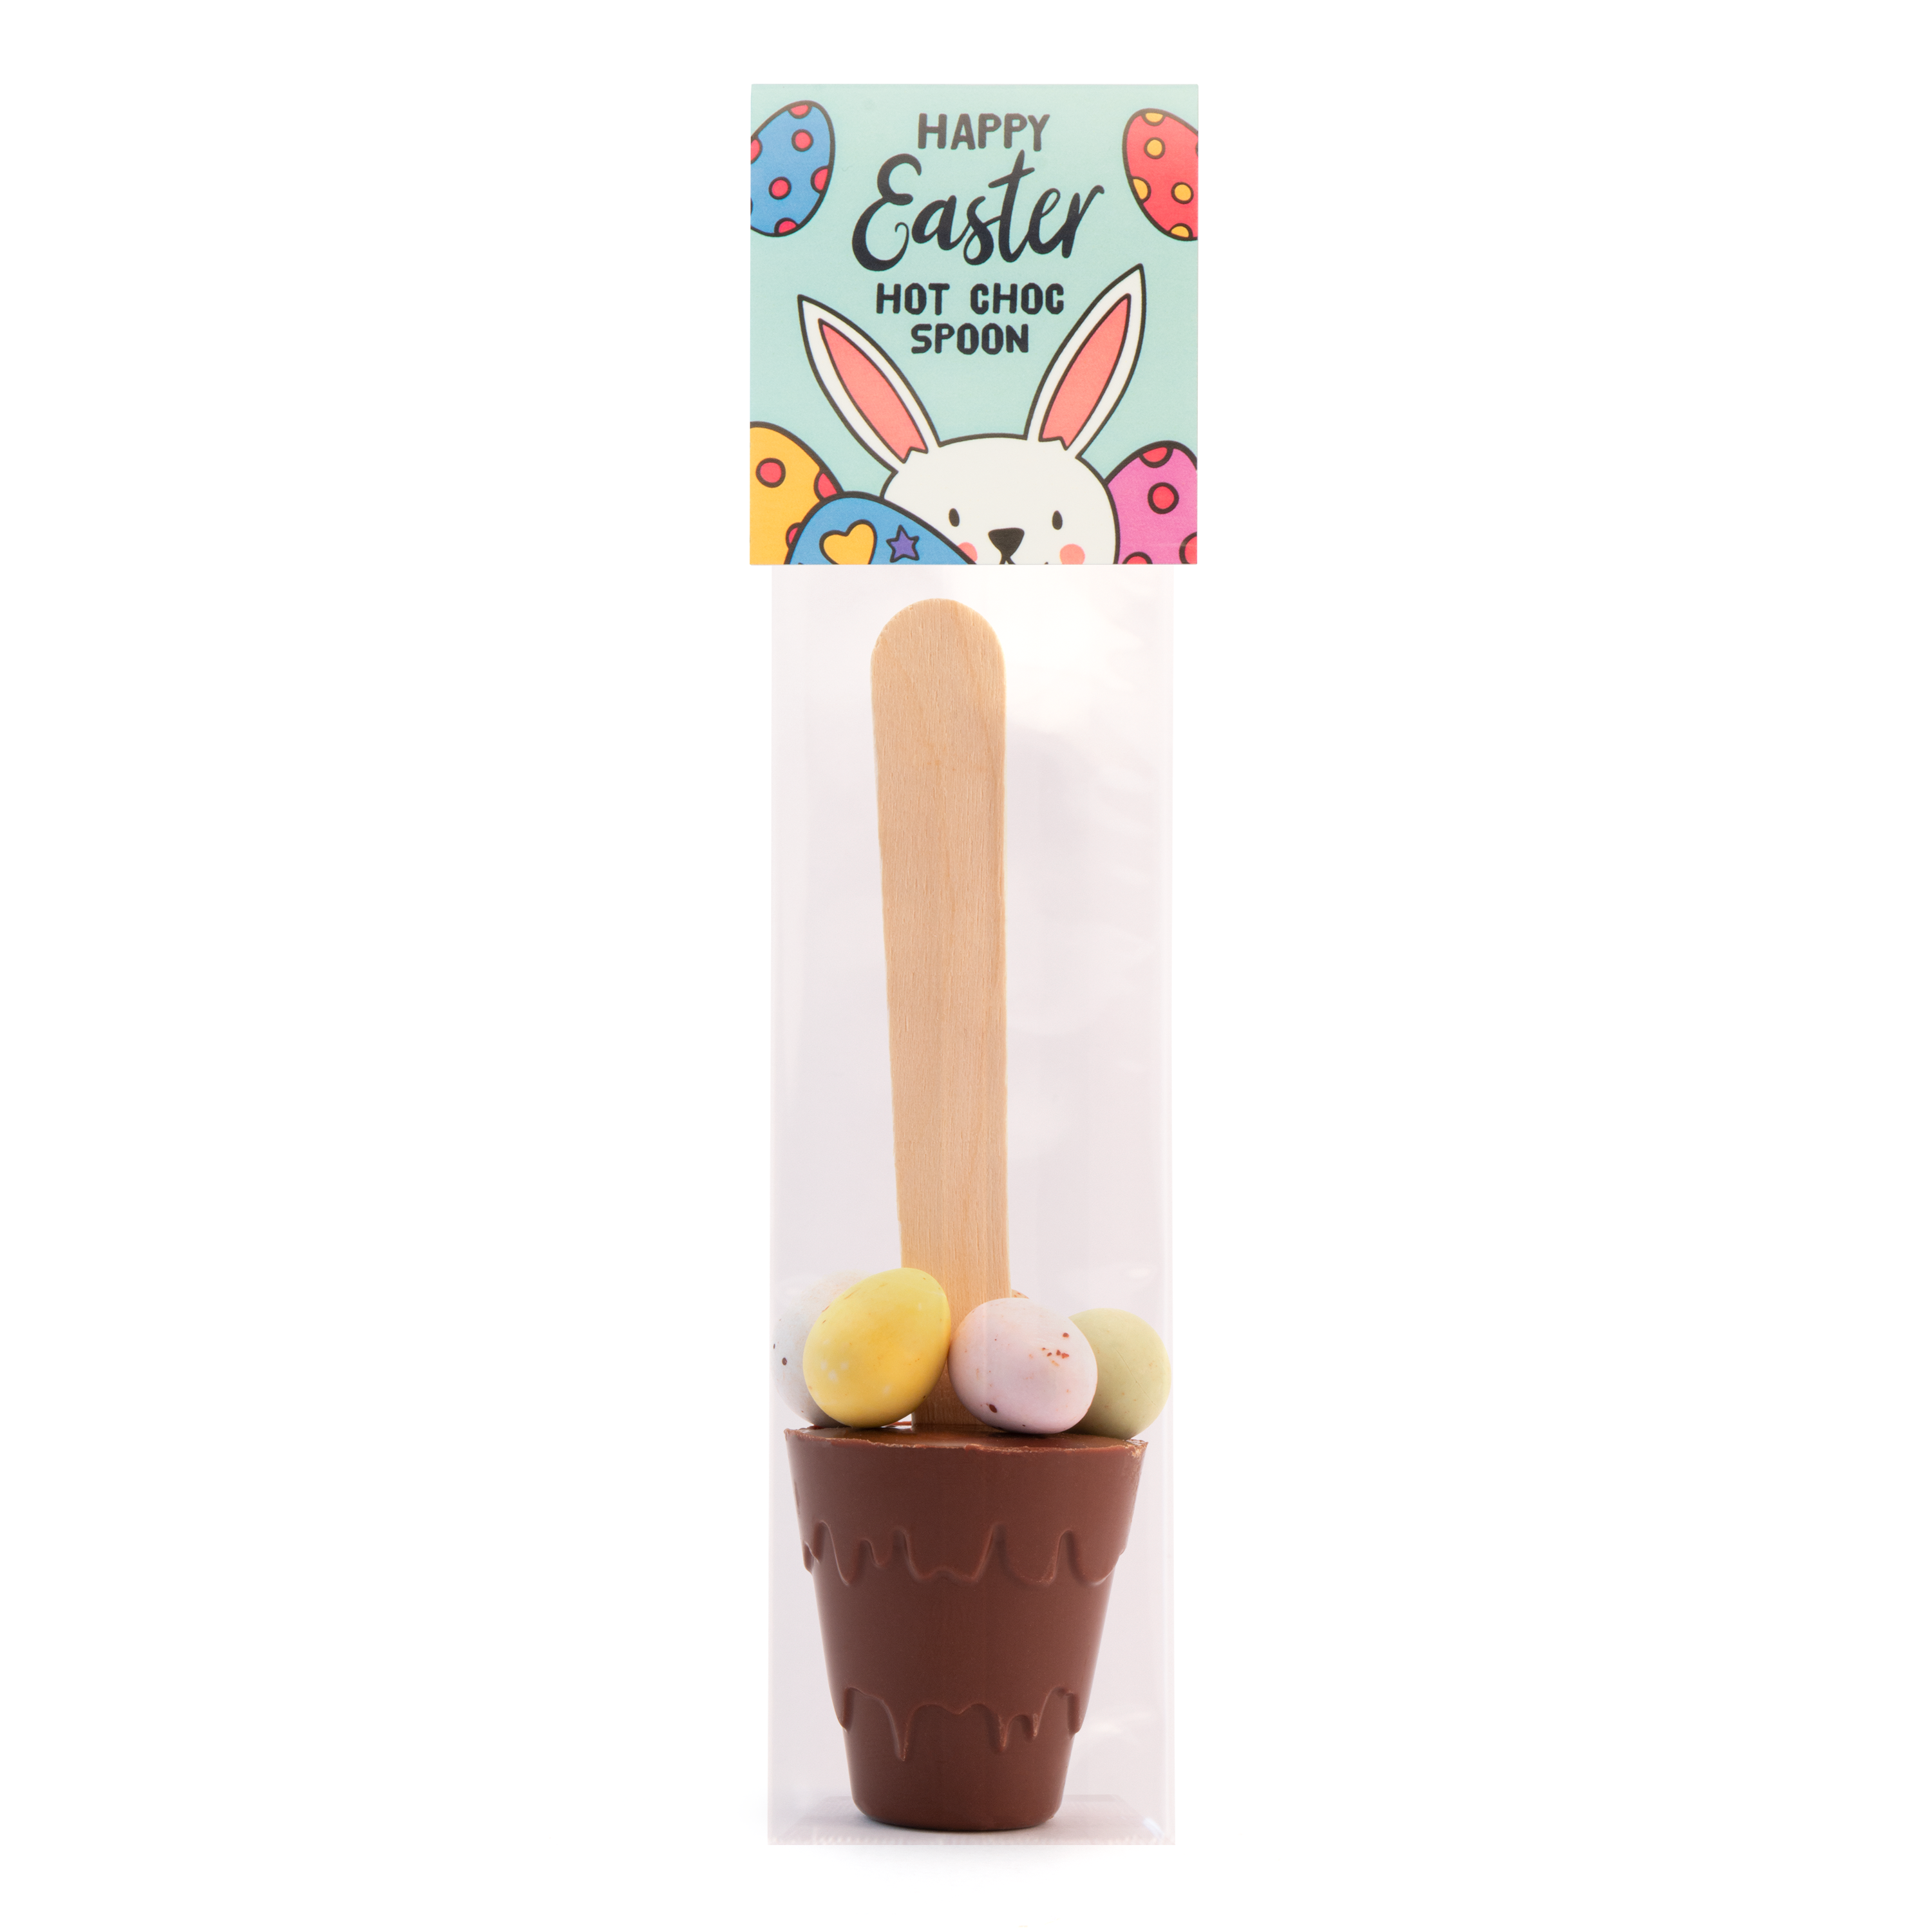 Easter - Info Card - Hot Choc Spoon with Speckled Eggs